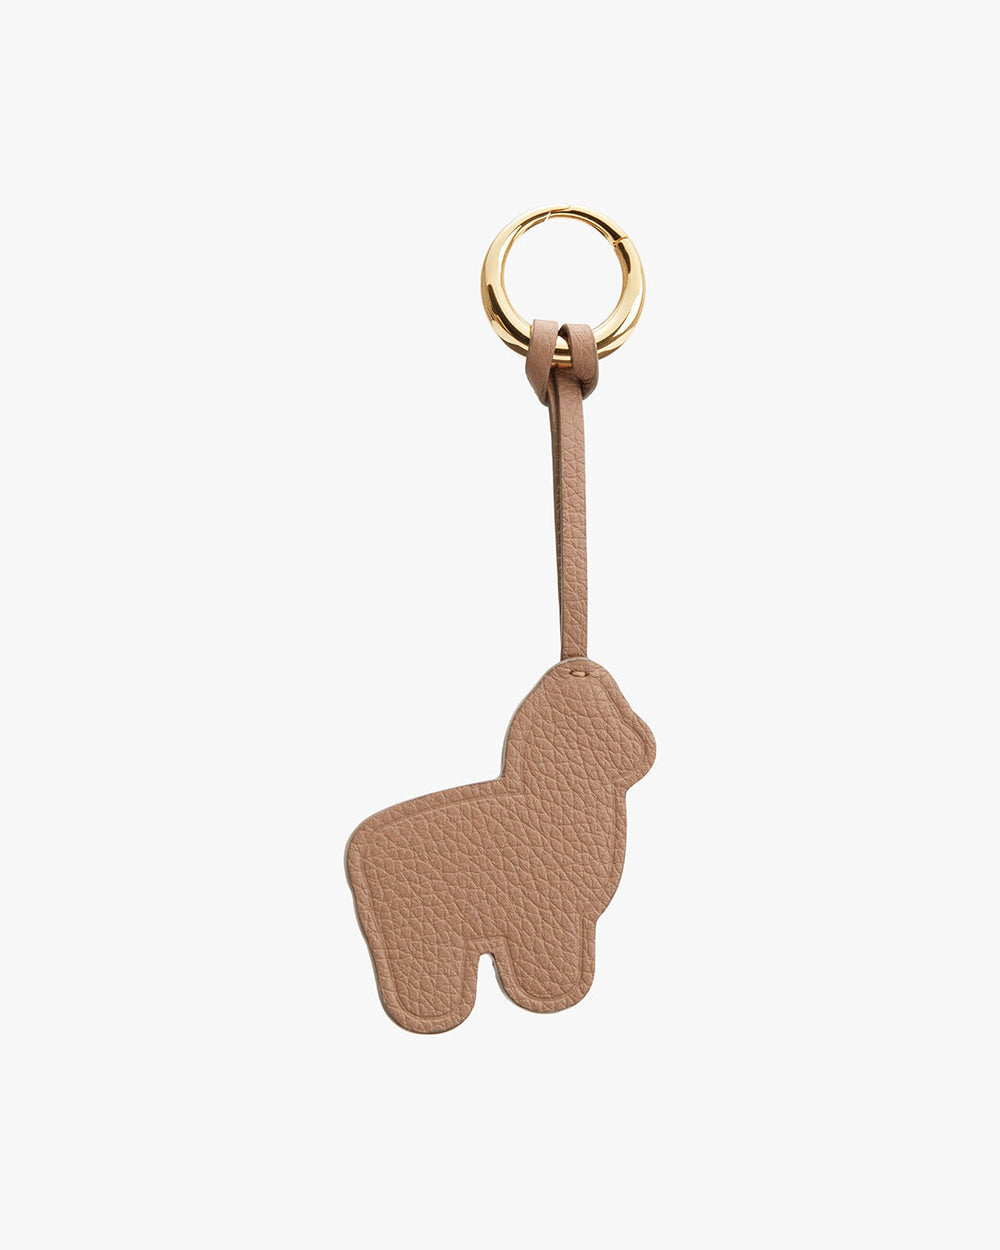 Keychain with an alpaca-shaped pendant attached to a ring via a strap.